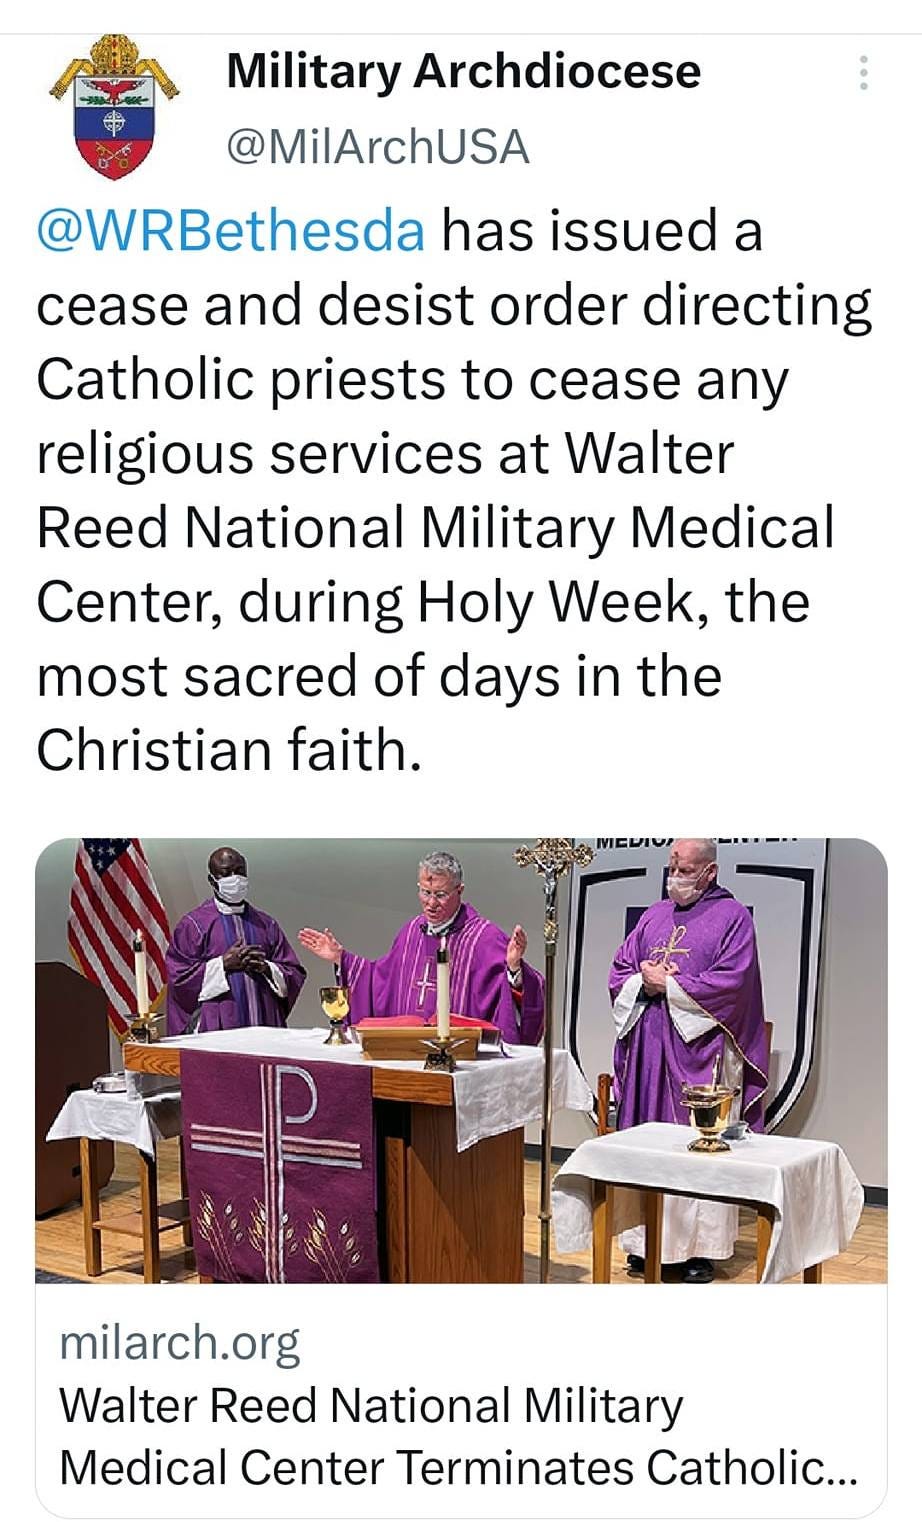 May be an image of 3 people and text that says '5:06 M 六 98% Thread Military Archdiocese @MilArchUSA @WRBethesda has issued a cease and desist order directing Catholic priests to cease any religious services at Walter Reed National Military Medical Center, during Holy Week, the most sacred of days in the Christian faith. milarch.org Walter Reed National Military Medical Center Terminates Catholic... Tweet your reply'